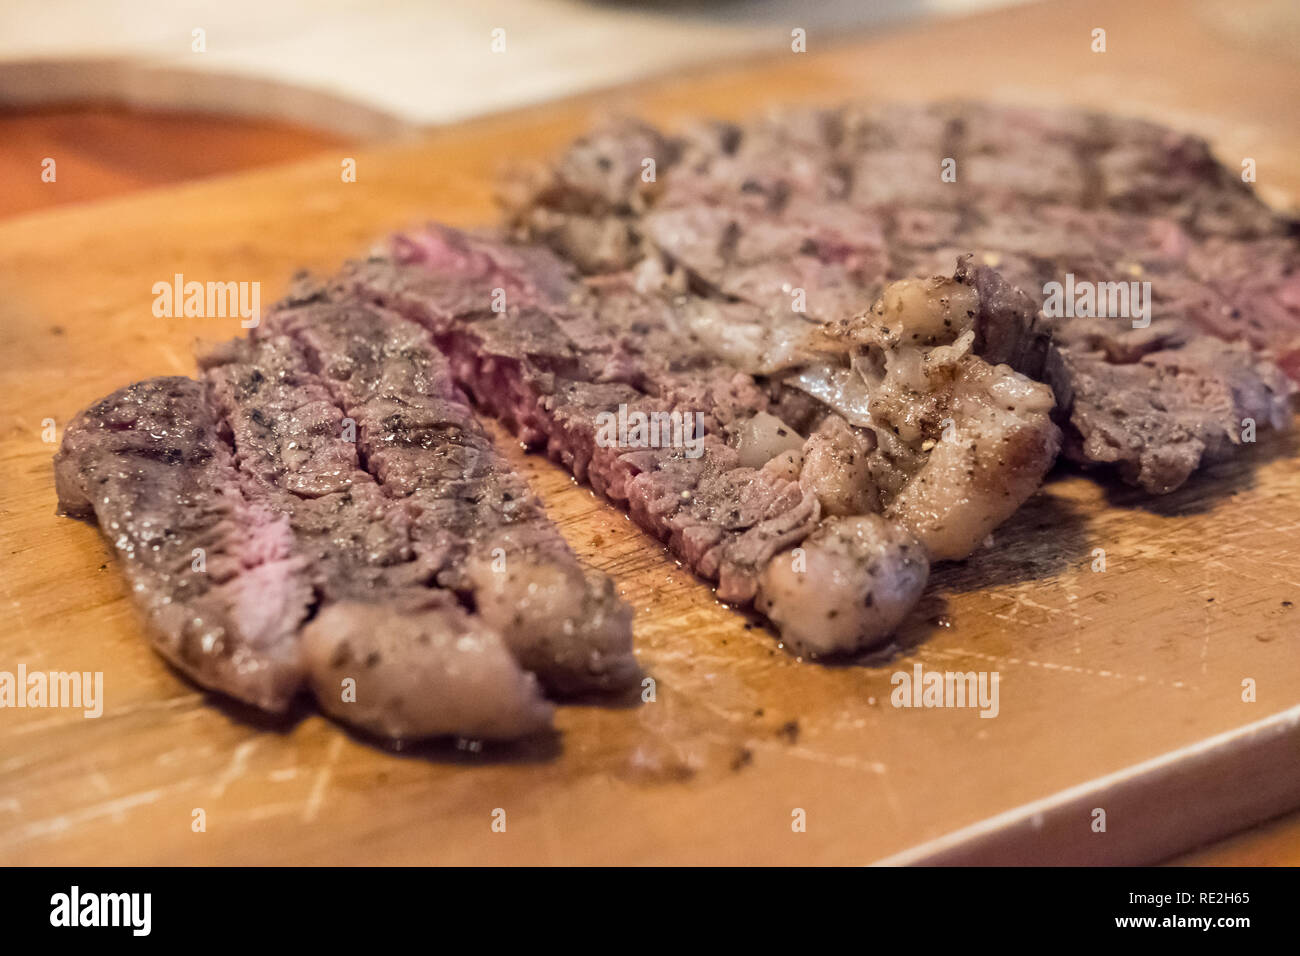 Medium rare meat on plate with sauce Stock Photo